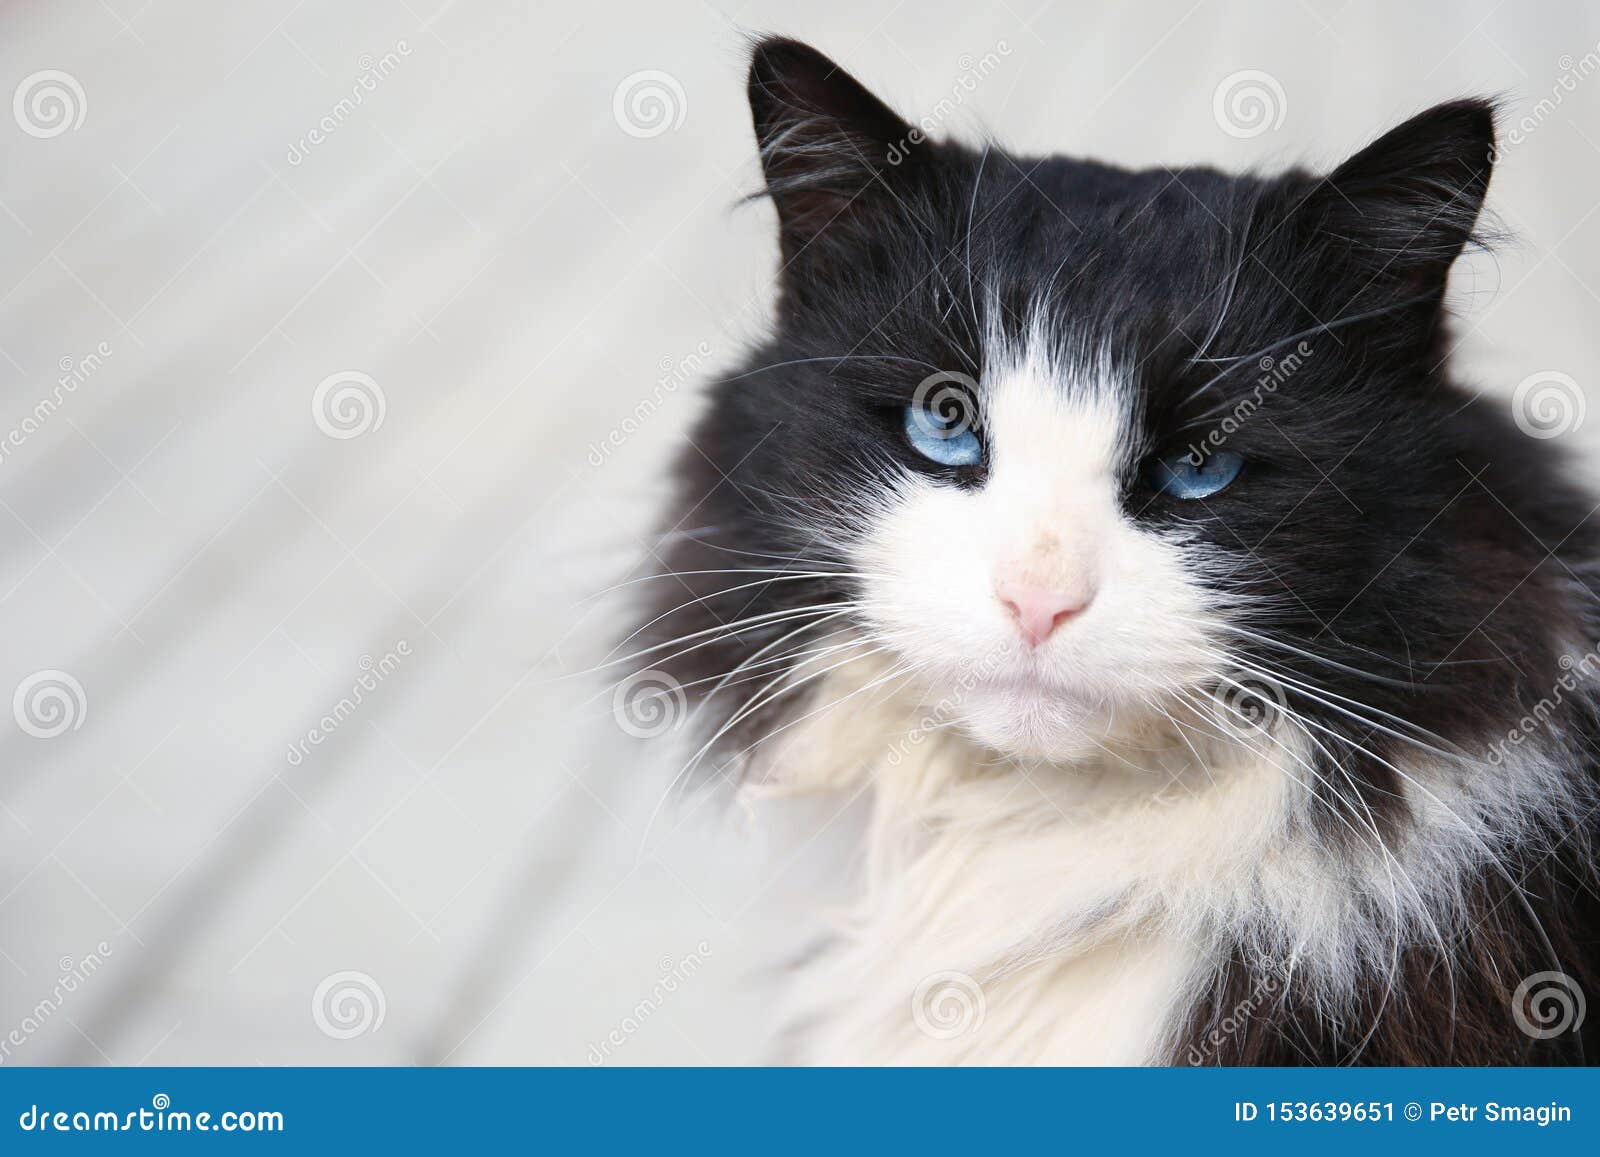 black fluffy cat with blue eyes